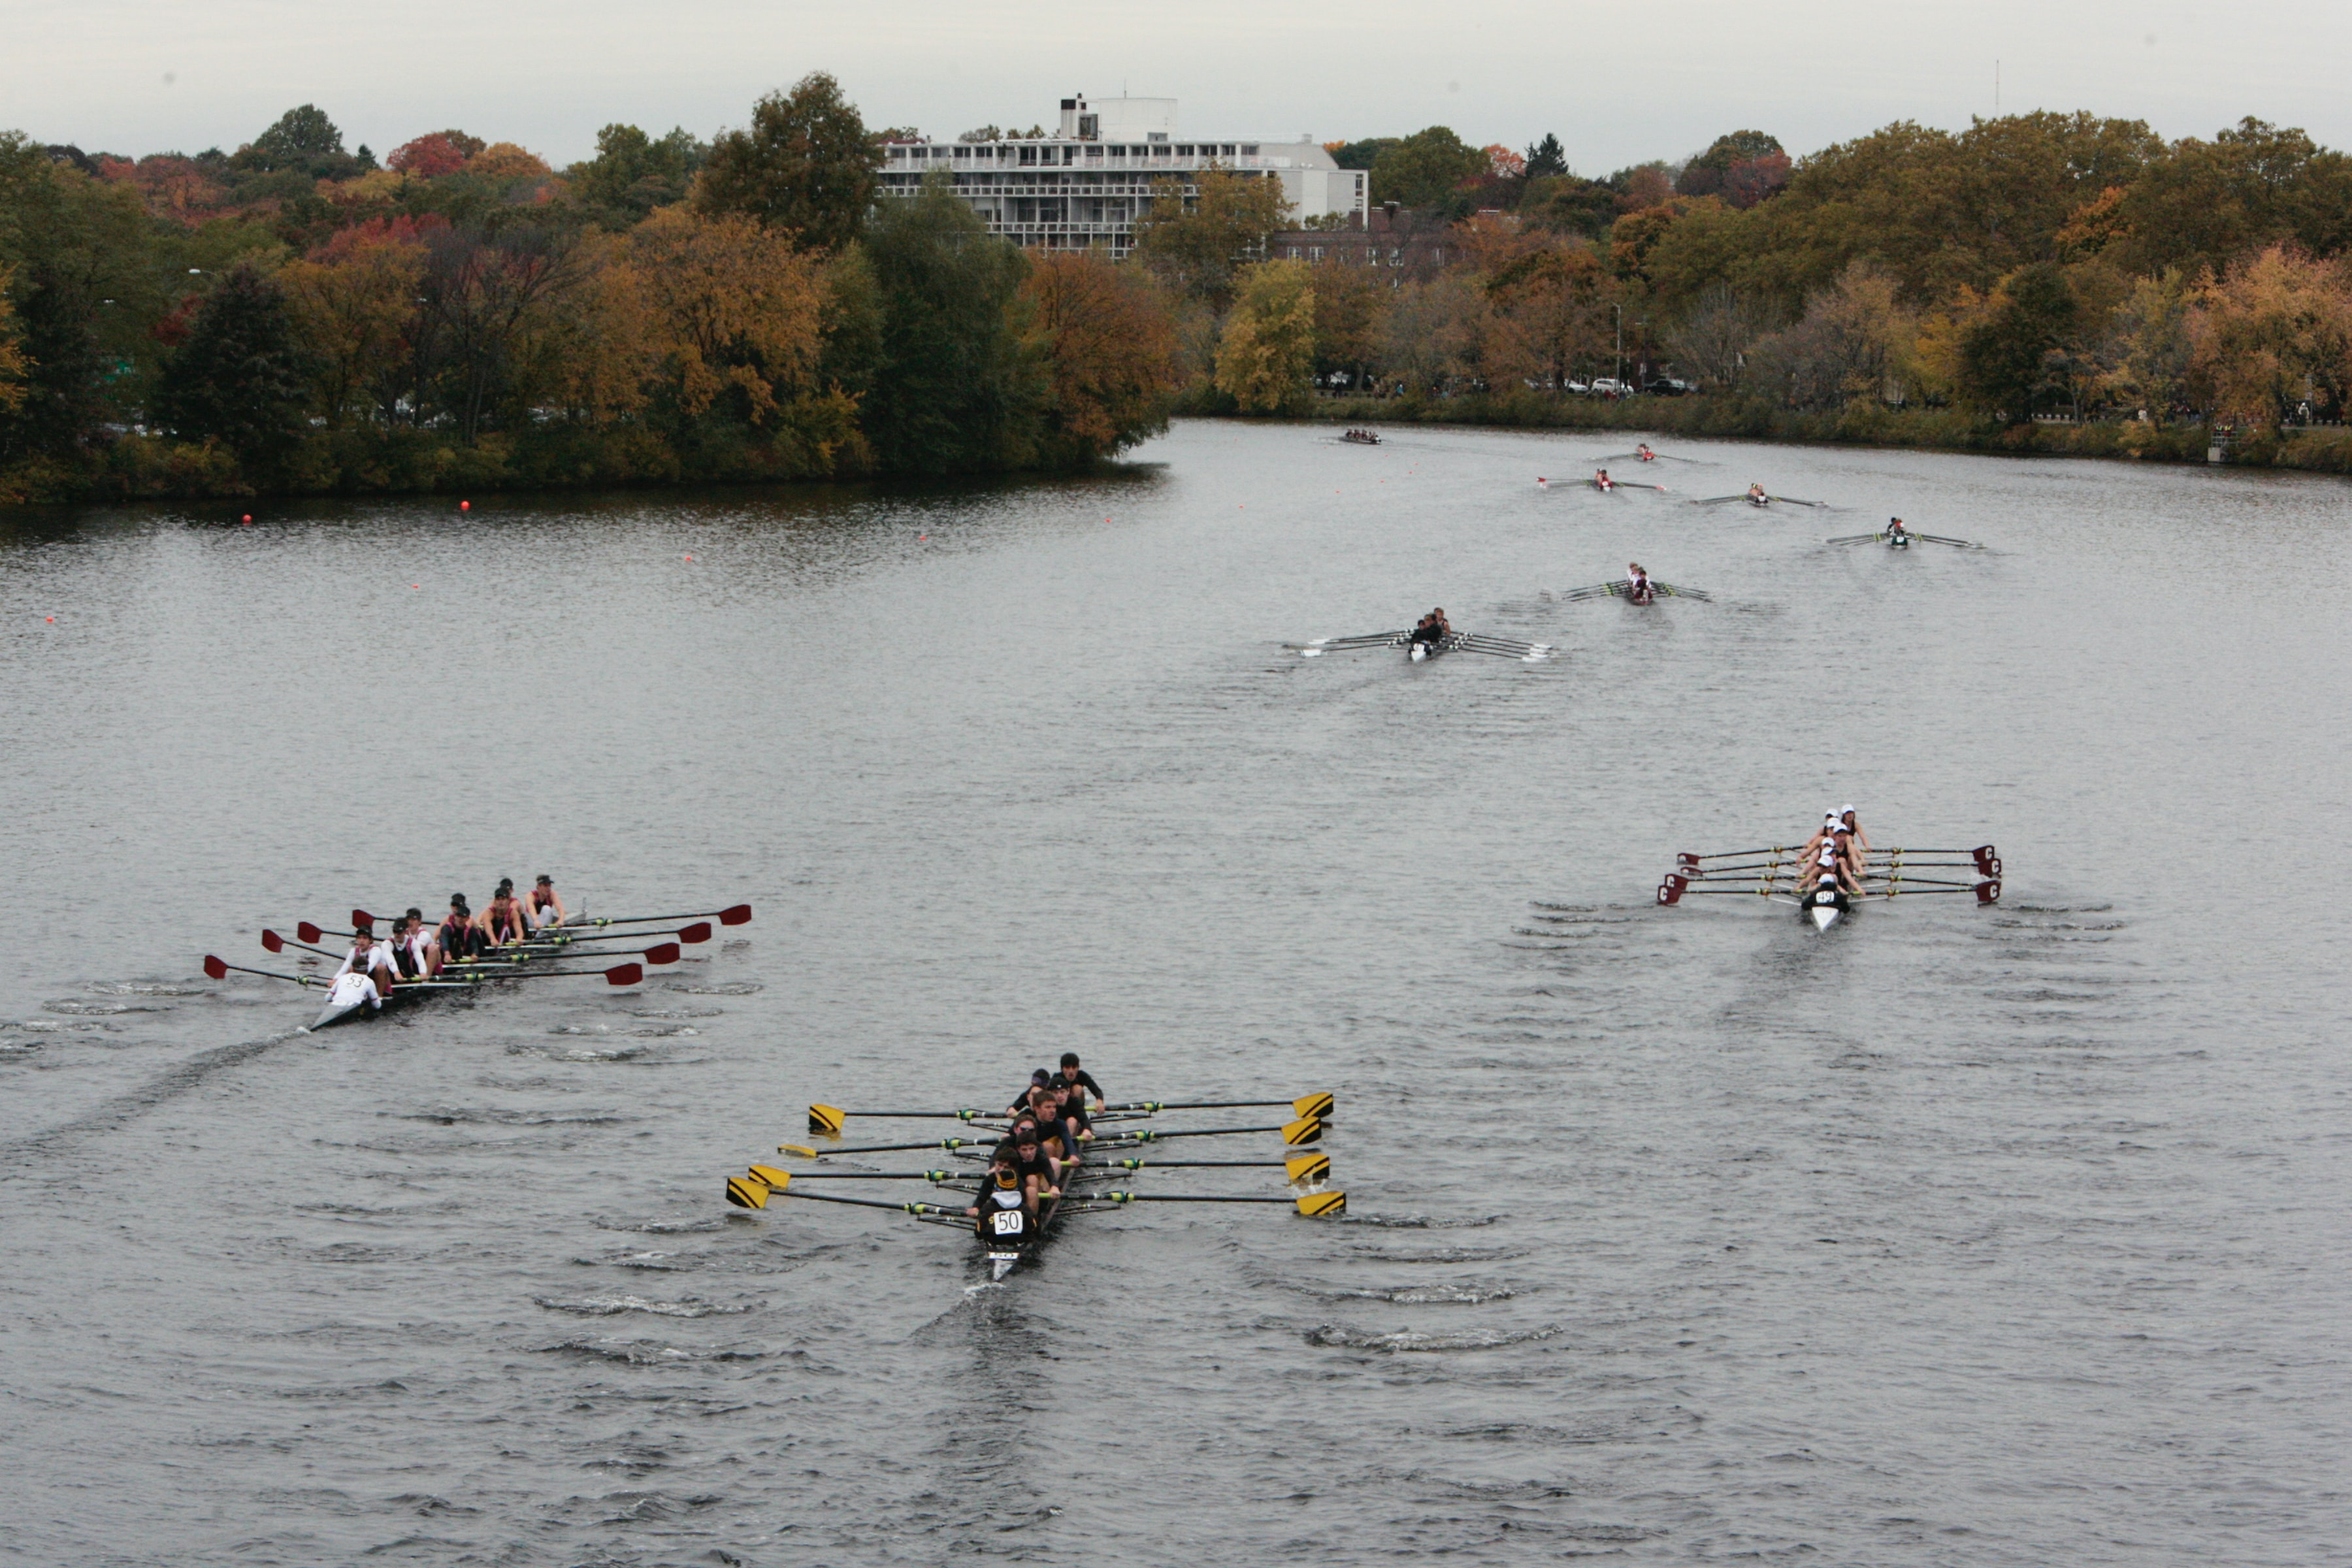 8. Rowing